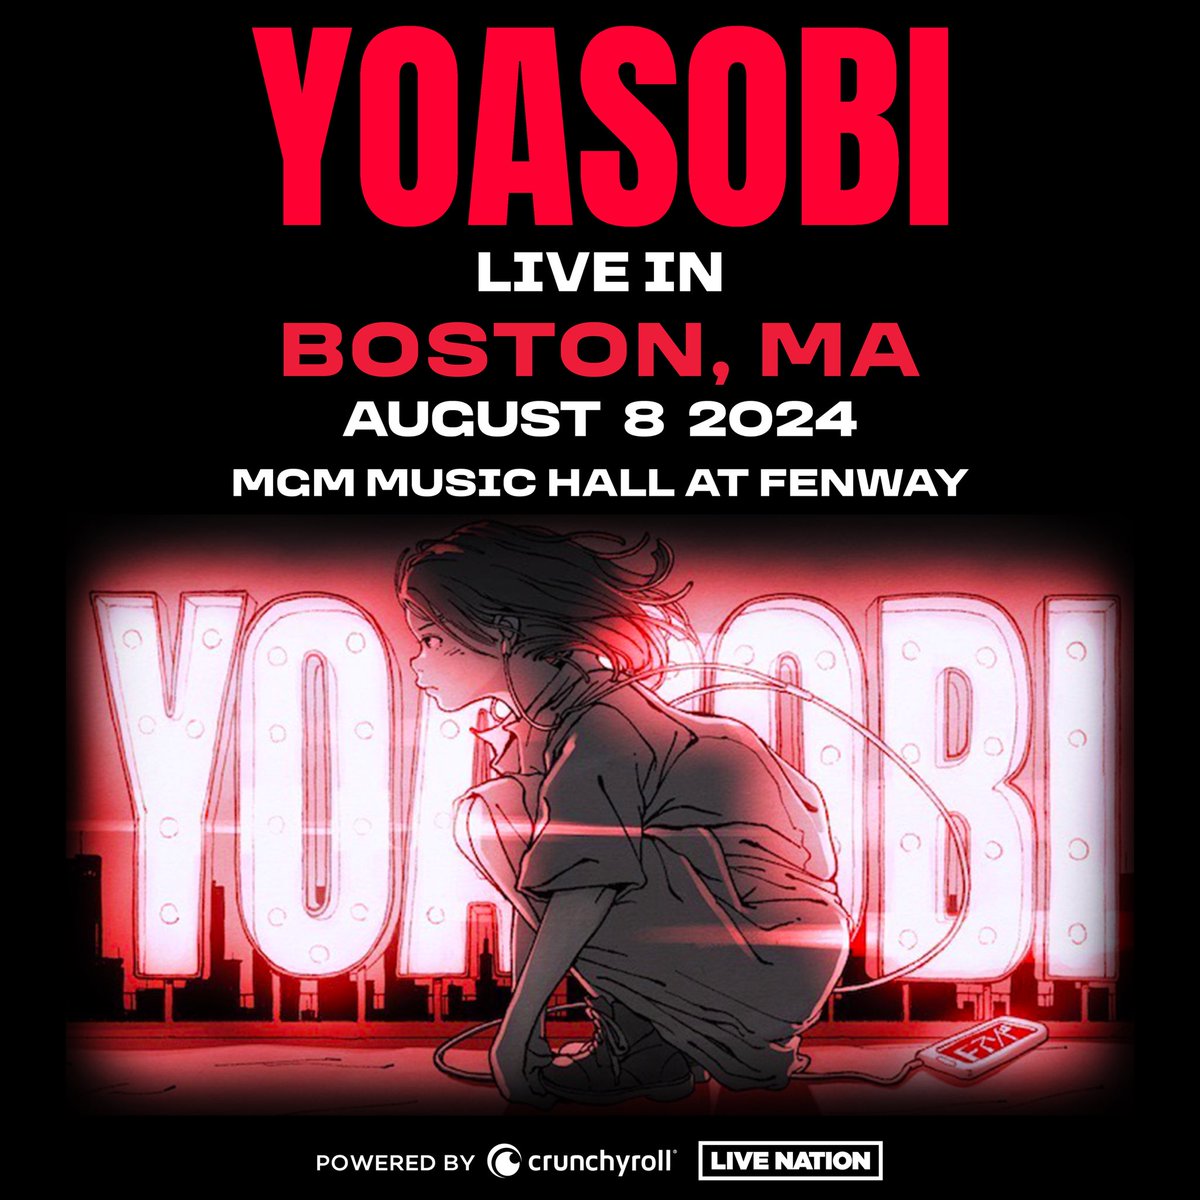 🆕YOASOBI in U.S. 2024 Summer☀️ ▶︎August 6 New York City ▶︎August 8 Boston, MA we hope to have great time with you🤝 ▼detail livenation.com/artist/K8vZ917… 今年8月、ニューヨーク、ボストンでのワンマンライブが決定しました！ また新しい景色が見られる未来にワクワクです。お楽しみに🔥